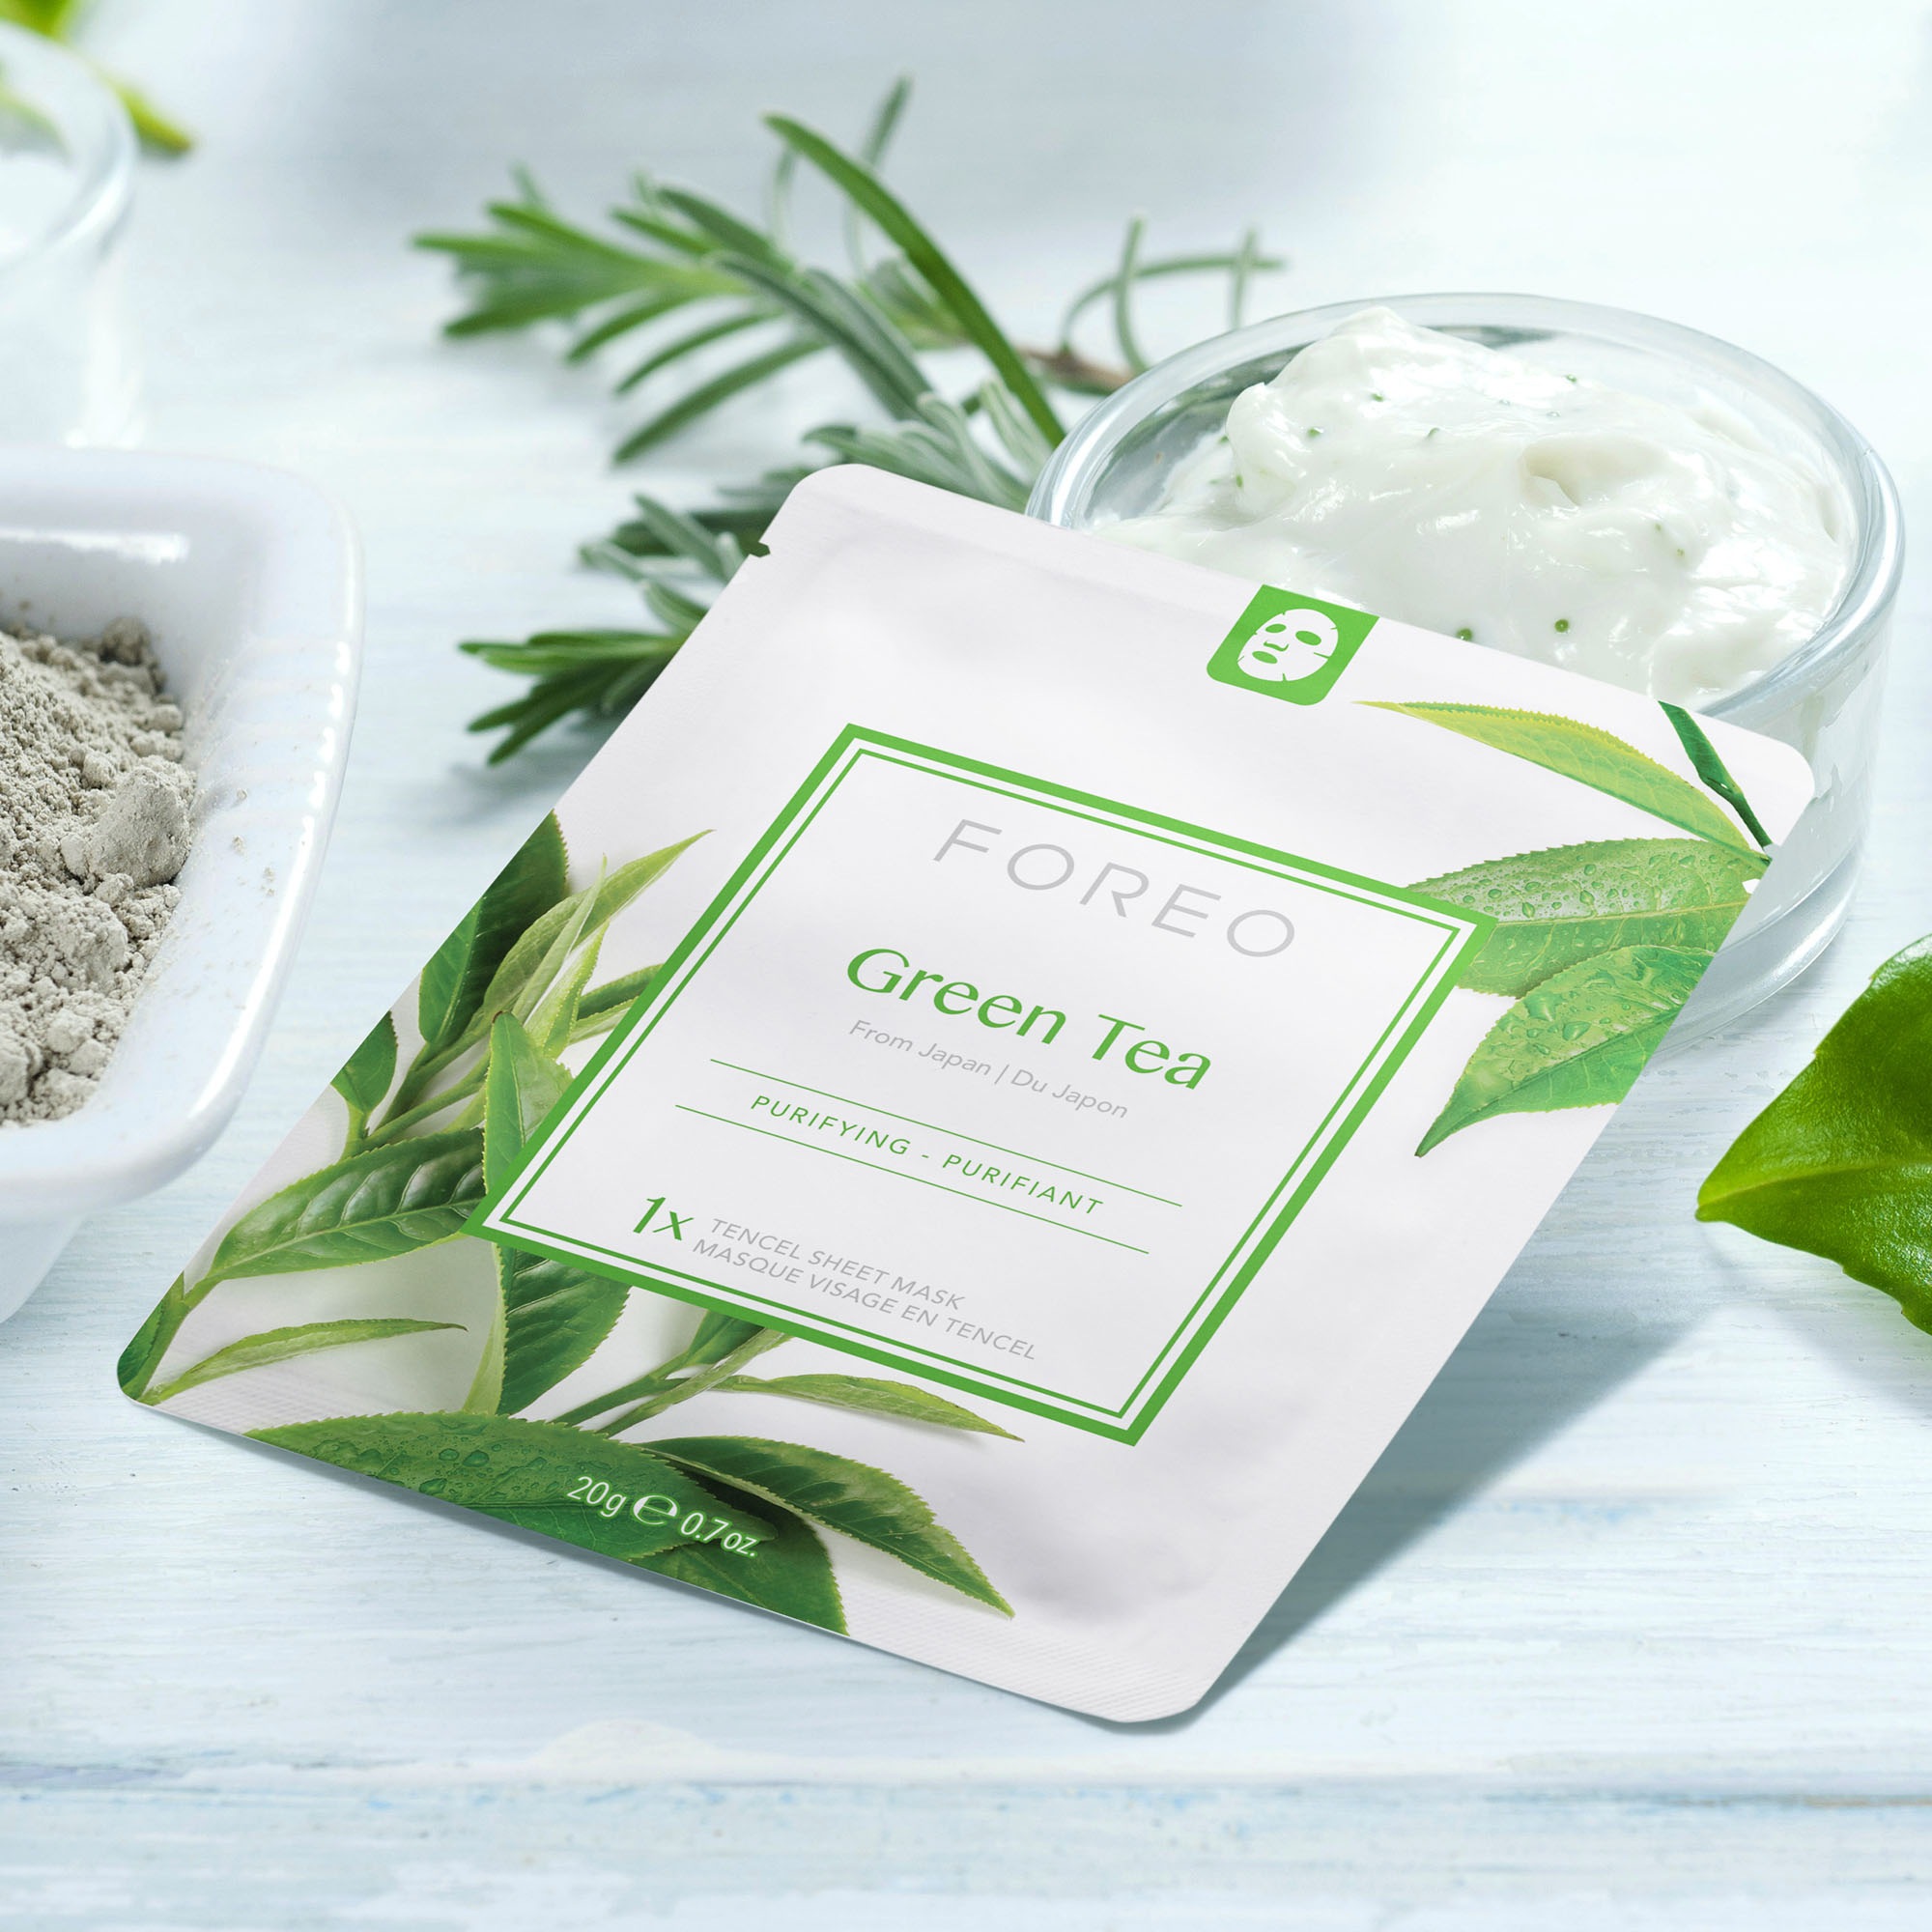 bei OTTOversand Gesichtsmaske Tea« FOREO Sheet Masks To »Farm Green Face Collection